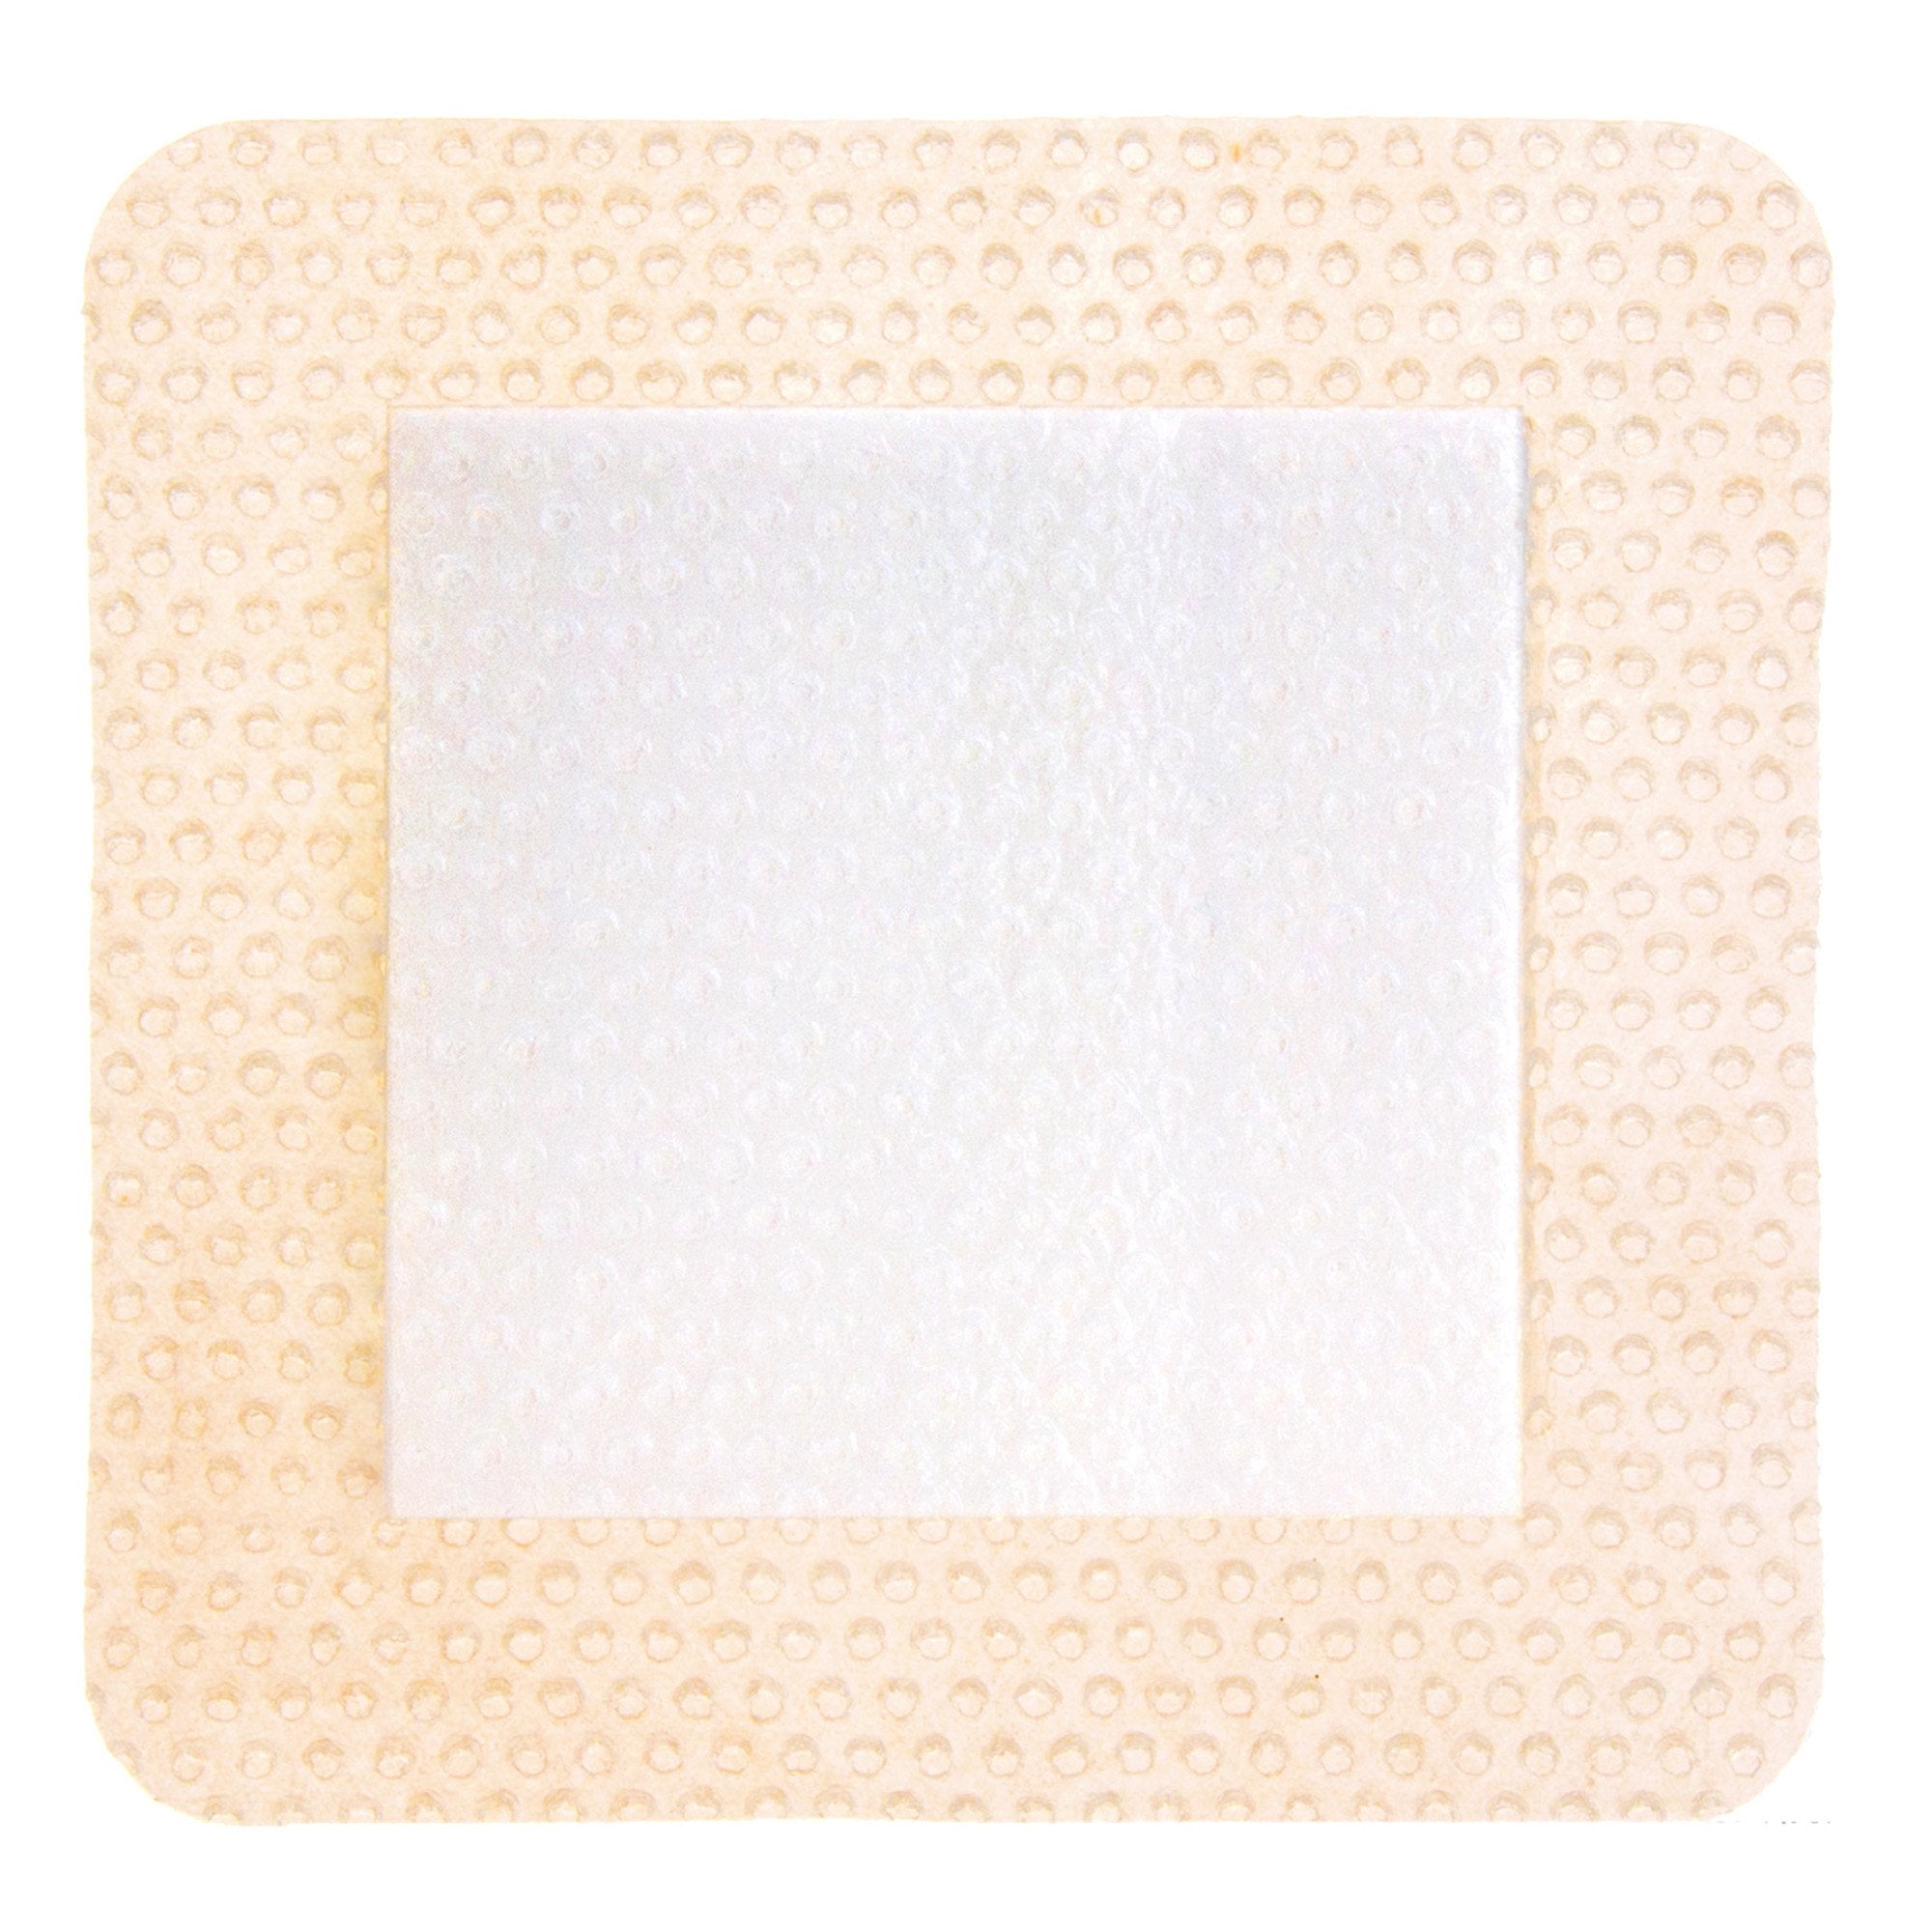 Foam Dressing ComfortFoam™ Border 6 X 8 Inch With Border Waterproof Backing Silicone Adhesive Rectangle Sterile